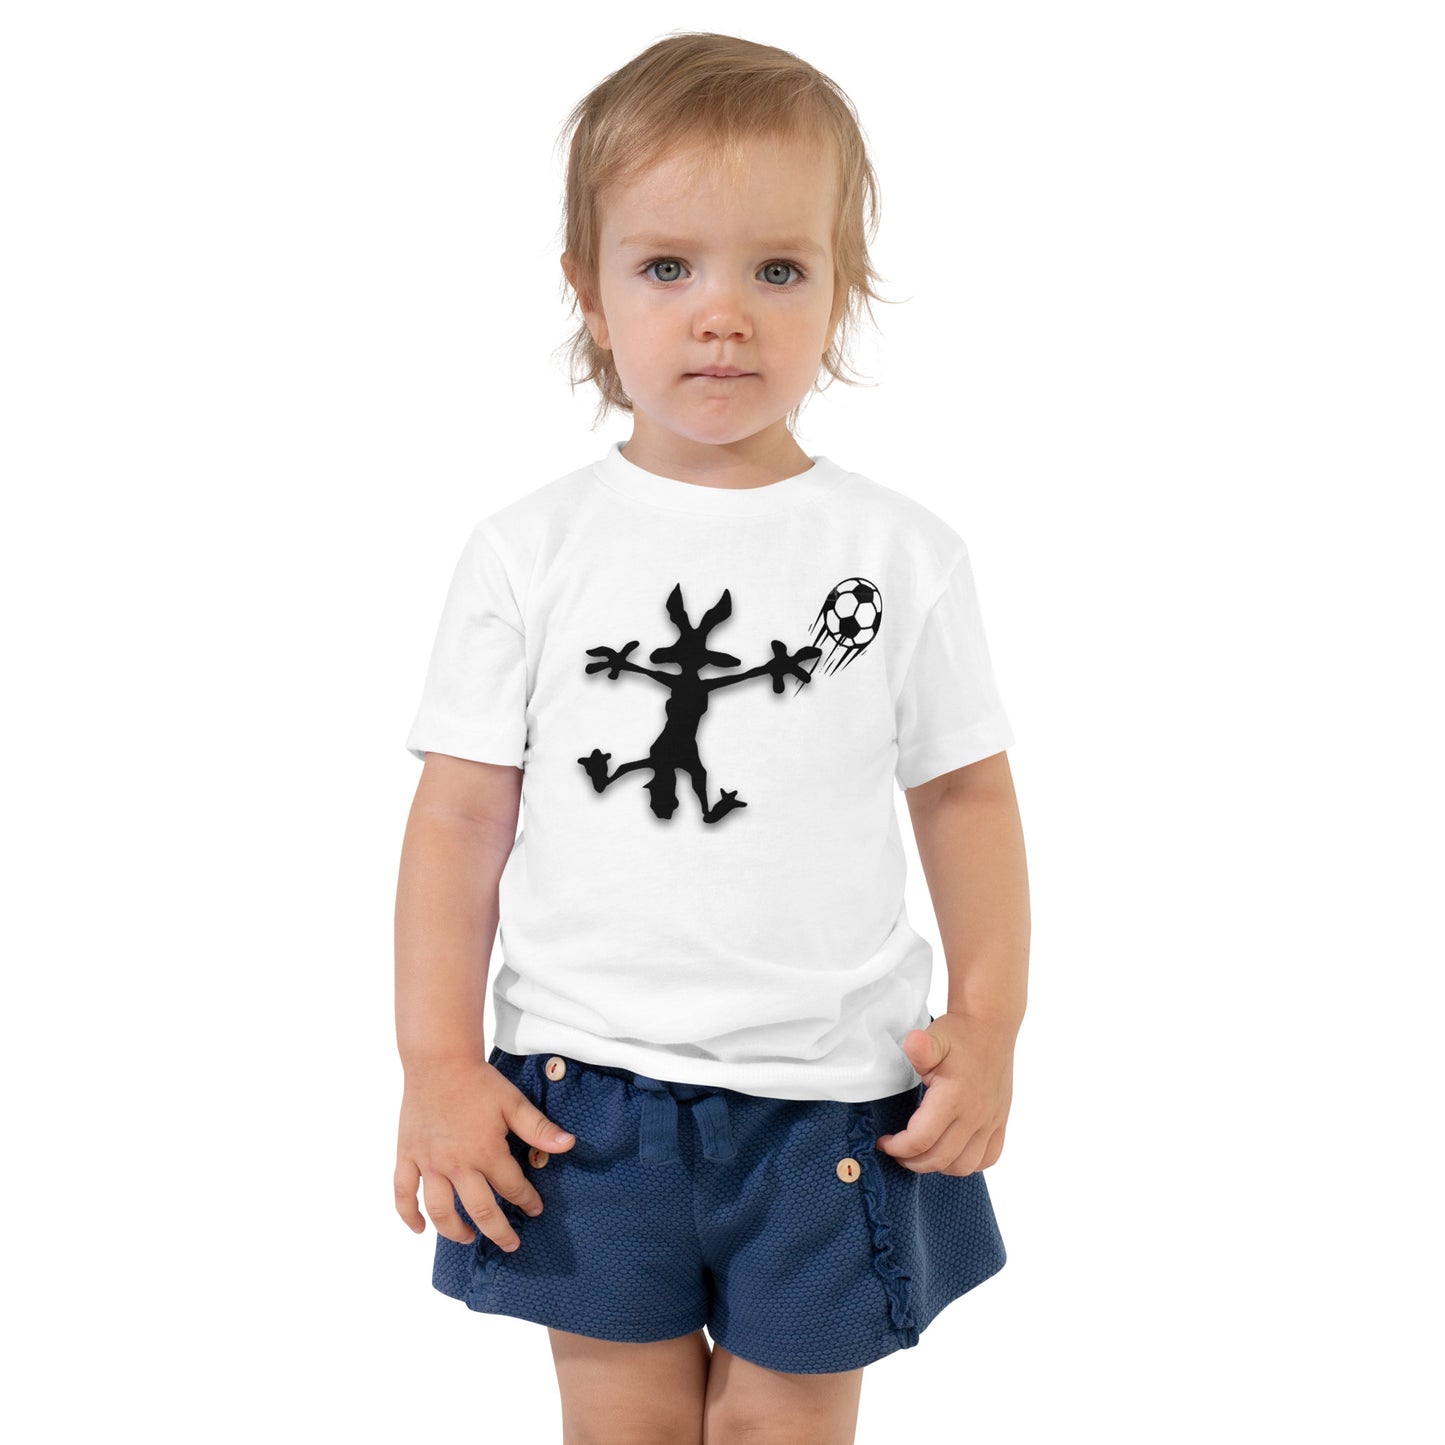 Wile Coyote Football Keeper Toddler T-shirt - Game Yarns